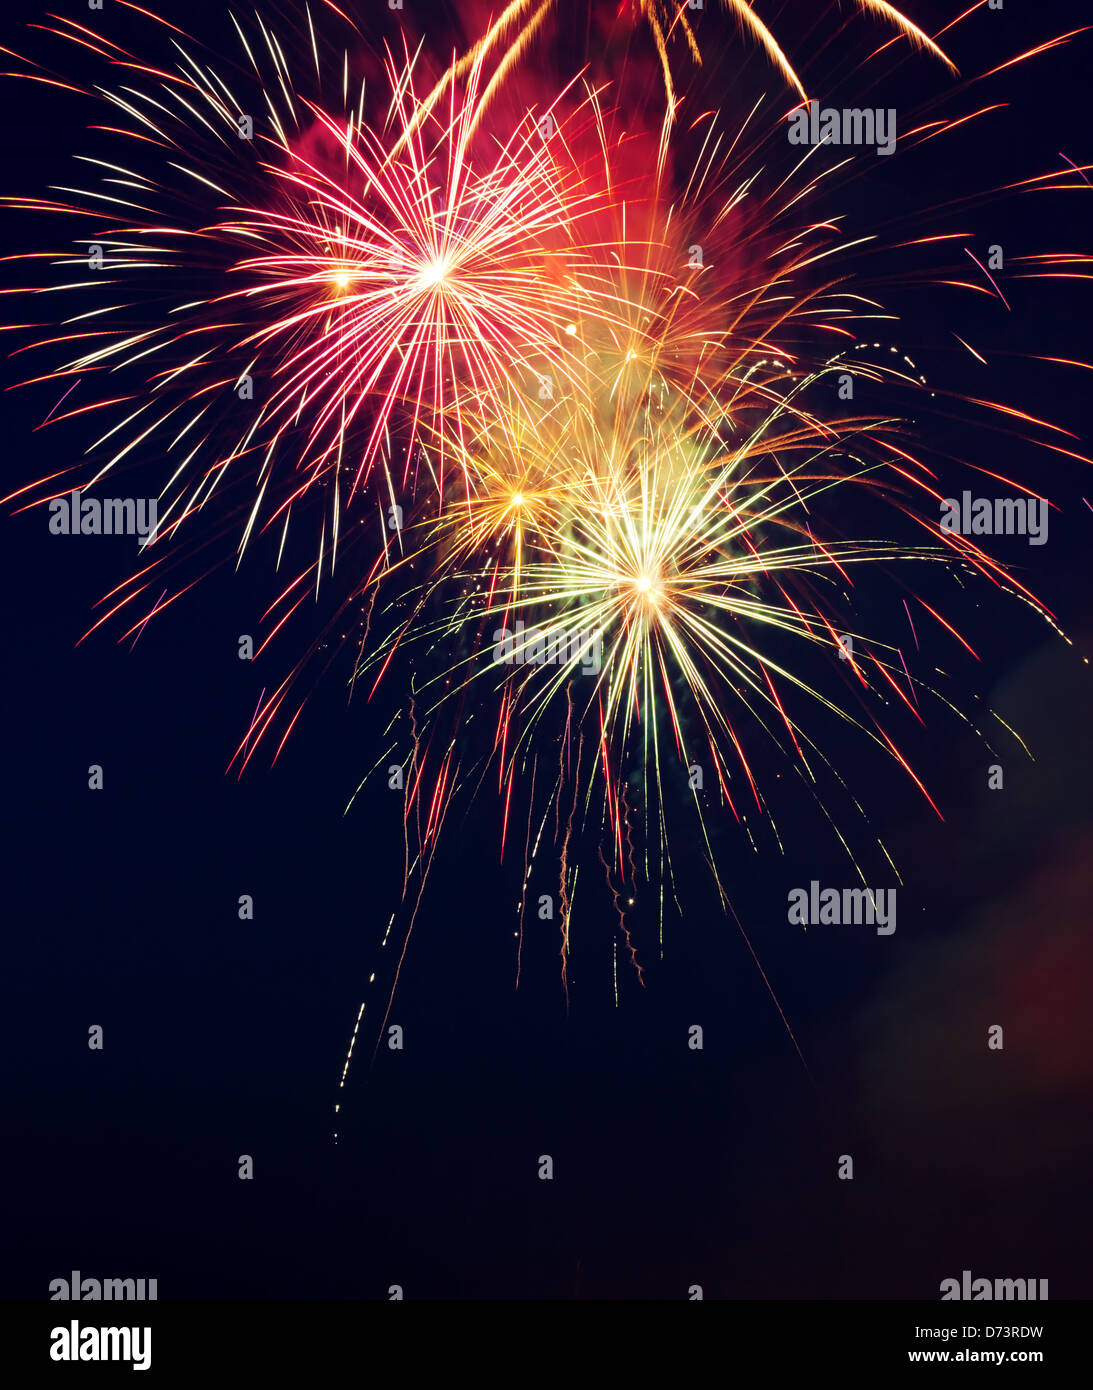 Fireworks in the night sky Stock Photo